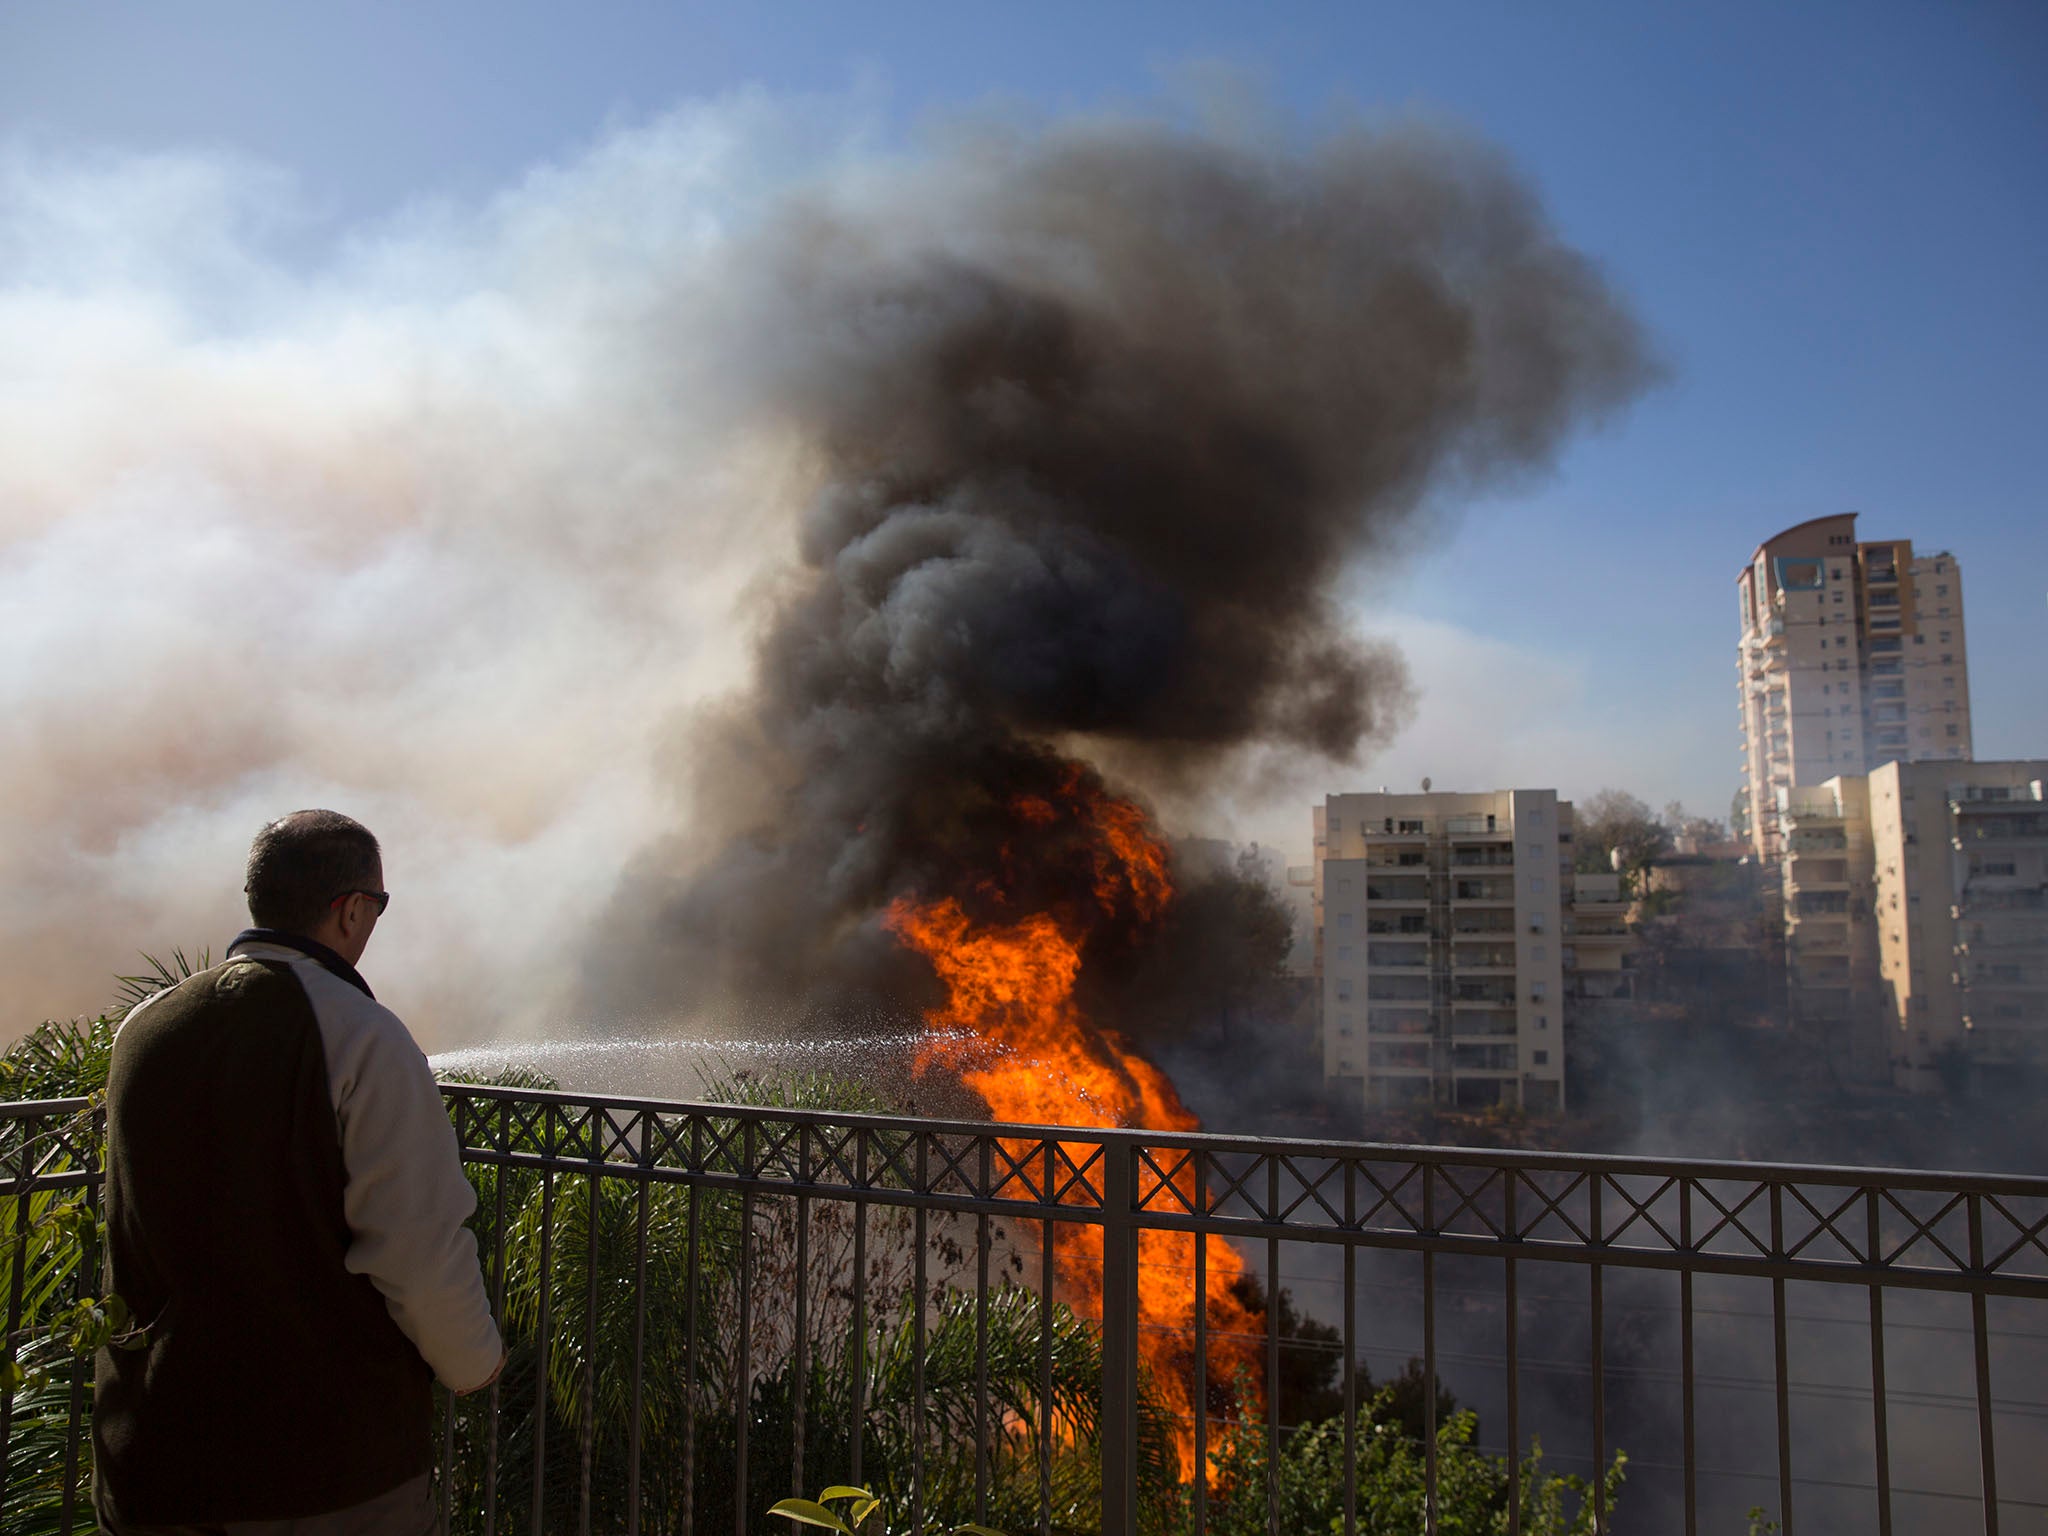 Wildfires have spread across northern Israel since Tuesday and caused thousands to evacuate the city of Haifa